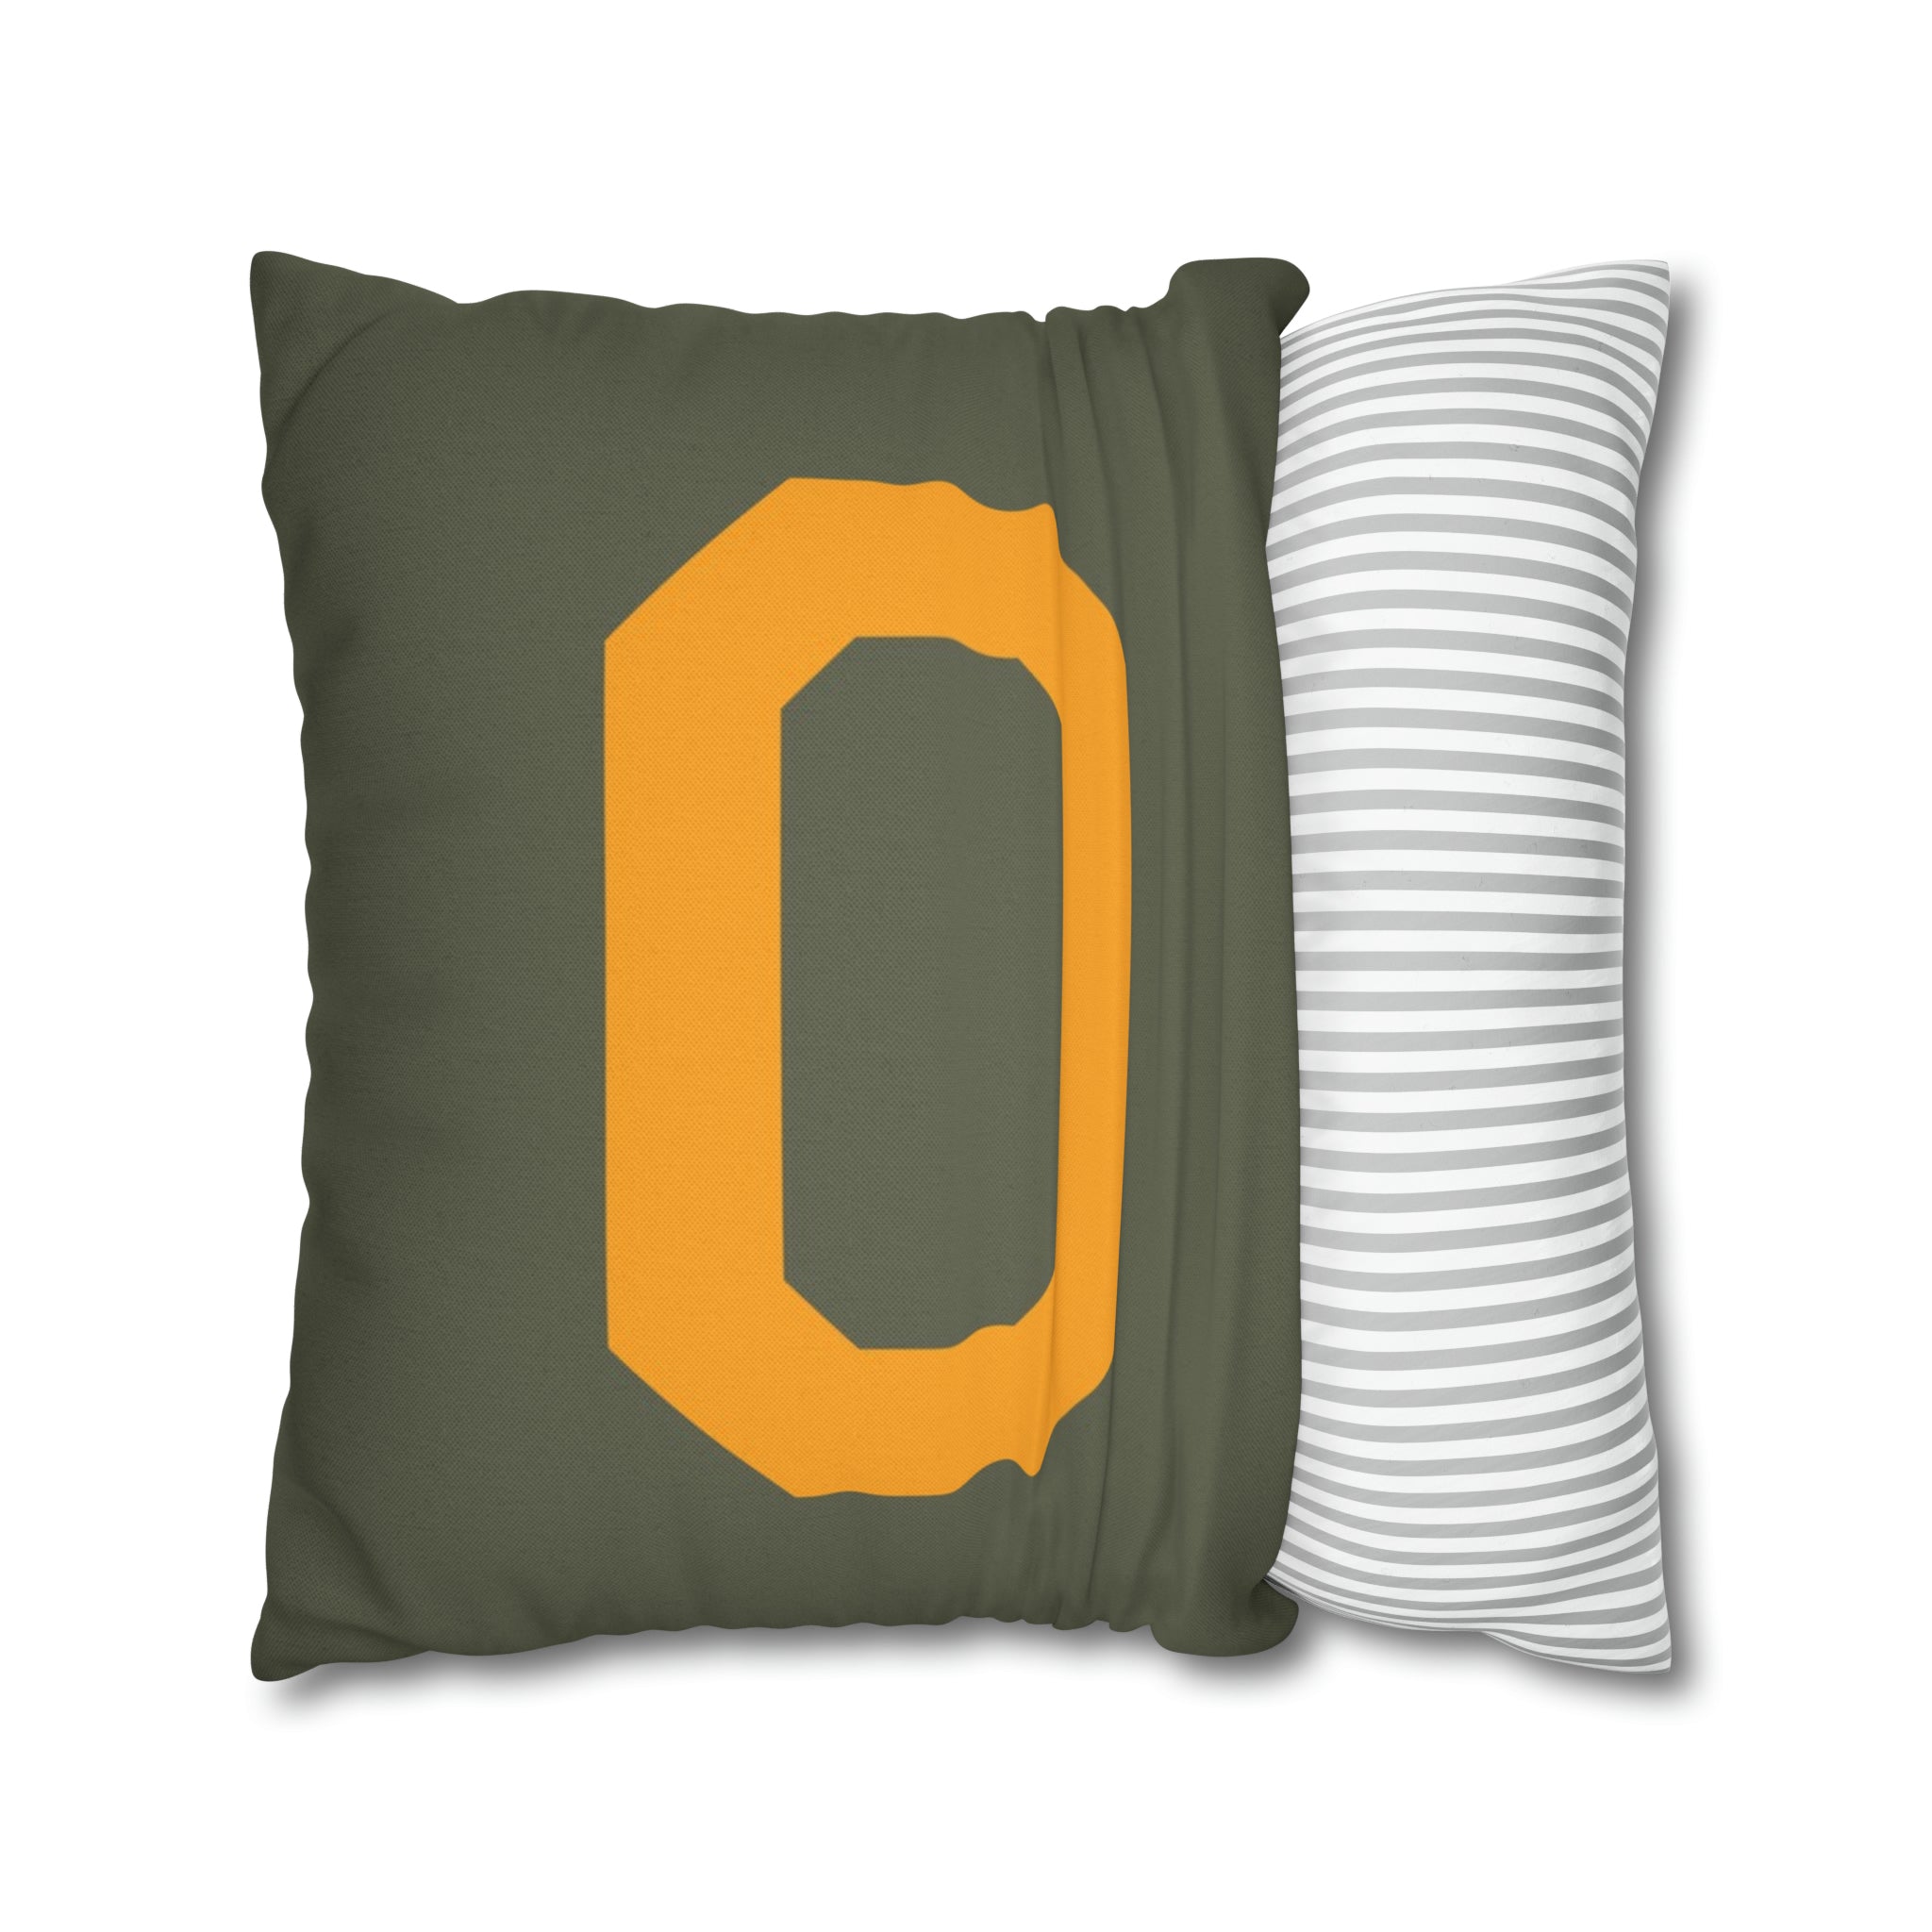 WWII USAAF Number "0" Square Pillowcase - I Love a Hangar